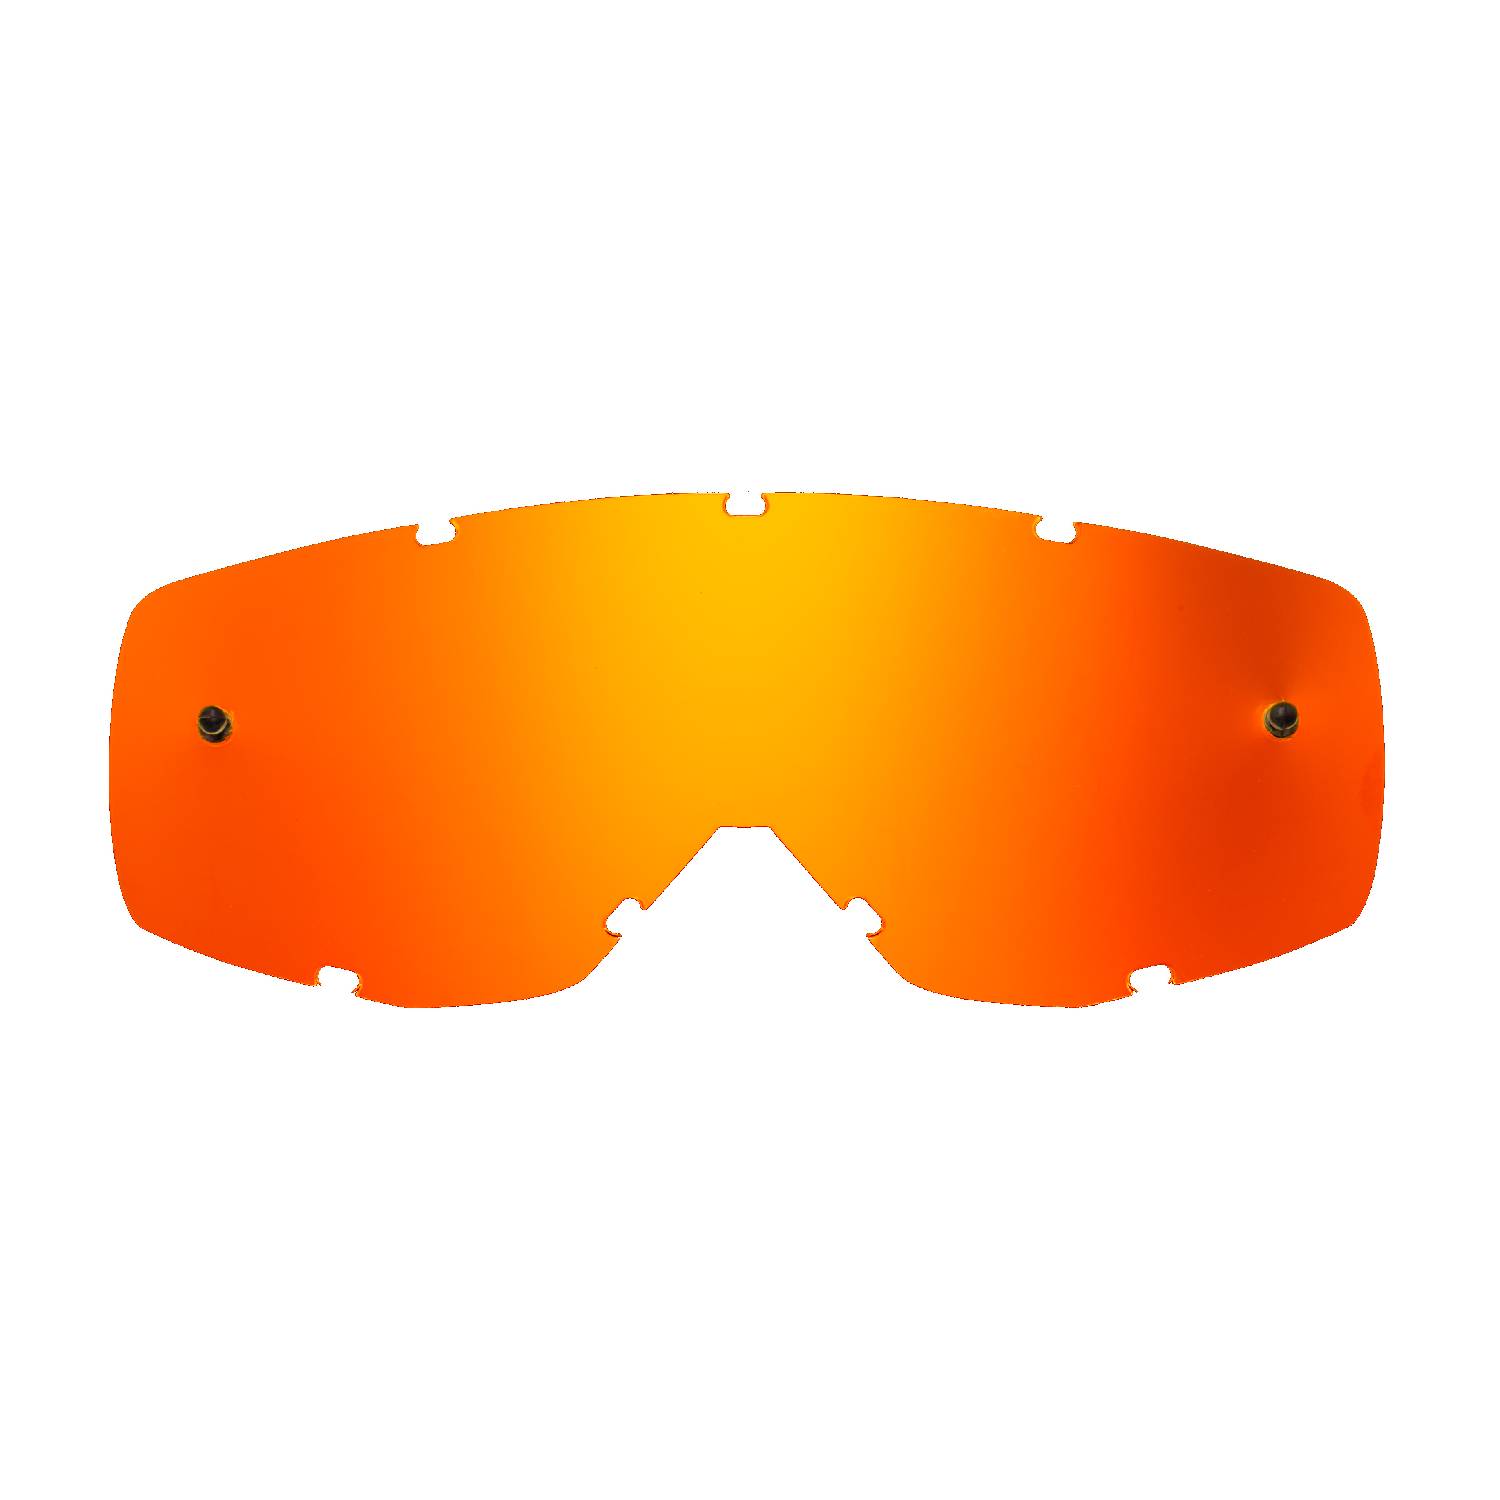 red-toned mirrored replacement lenses for goggles compatible for Scott Hustle/ Primal / Tyrant / Split goggle